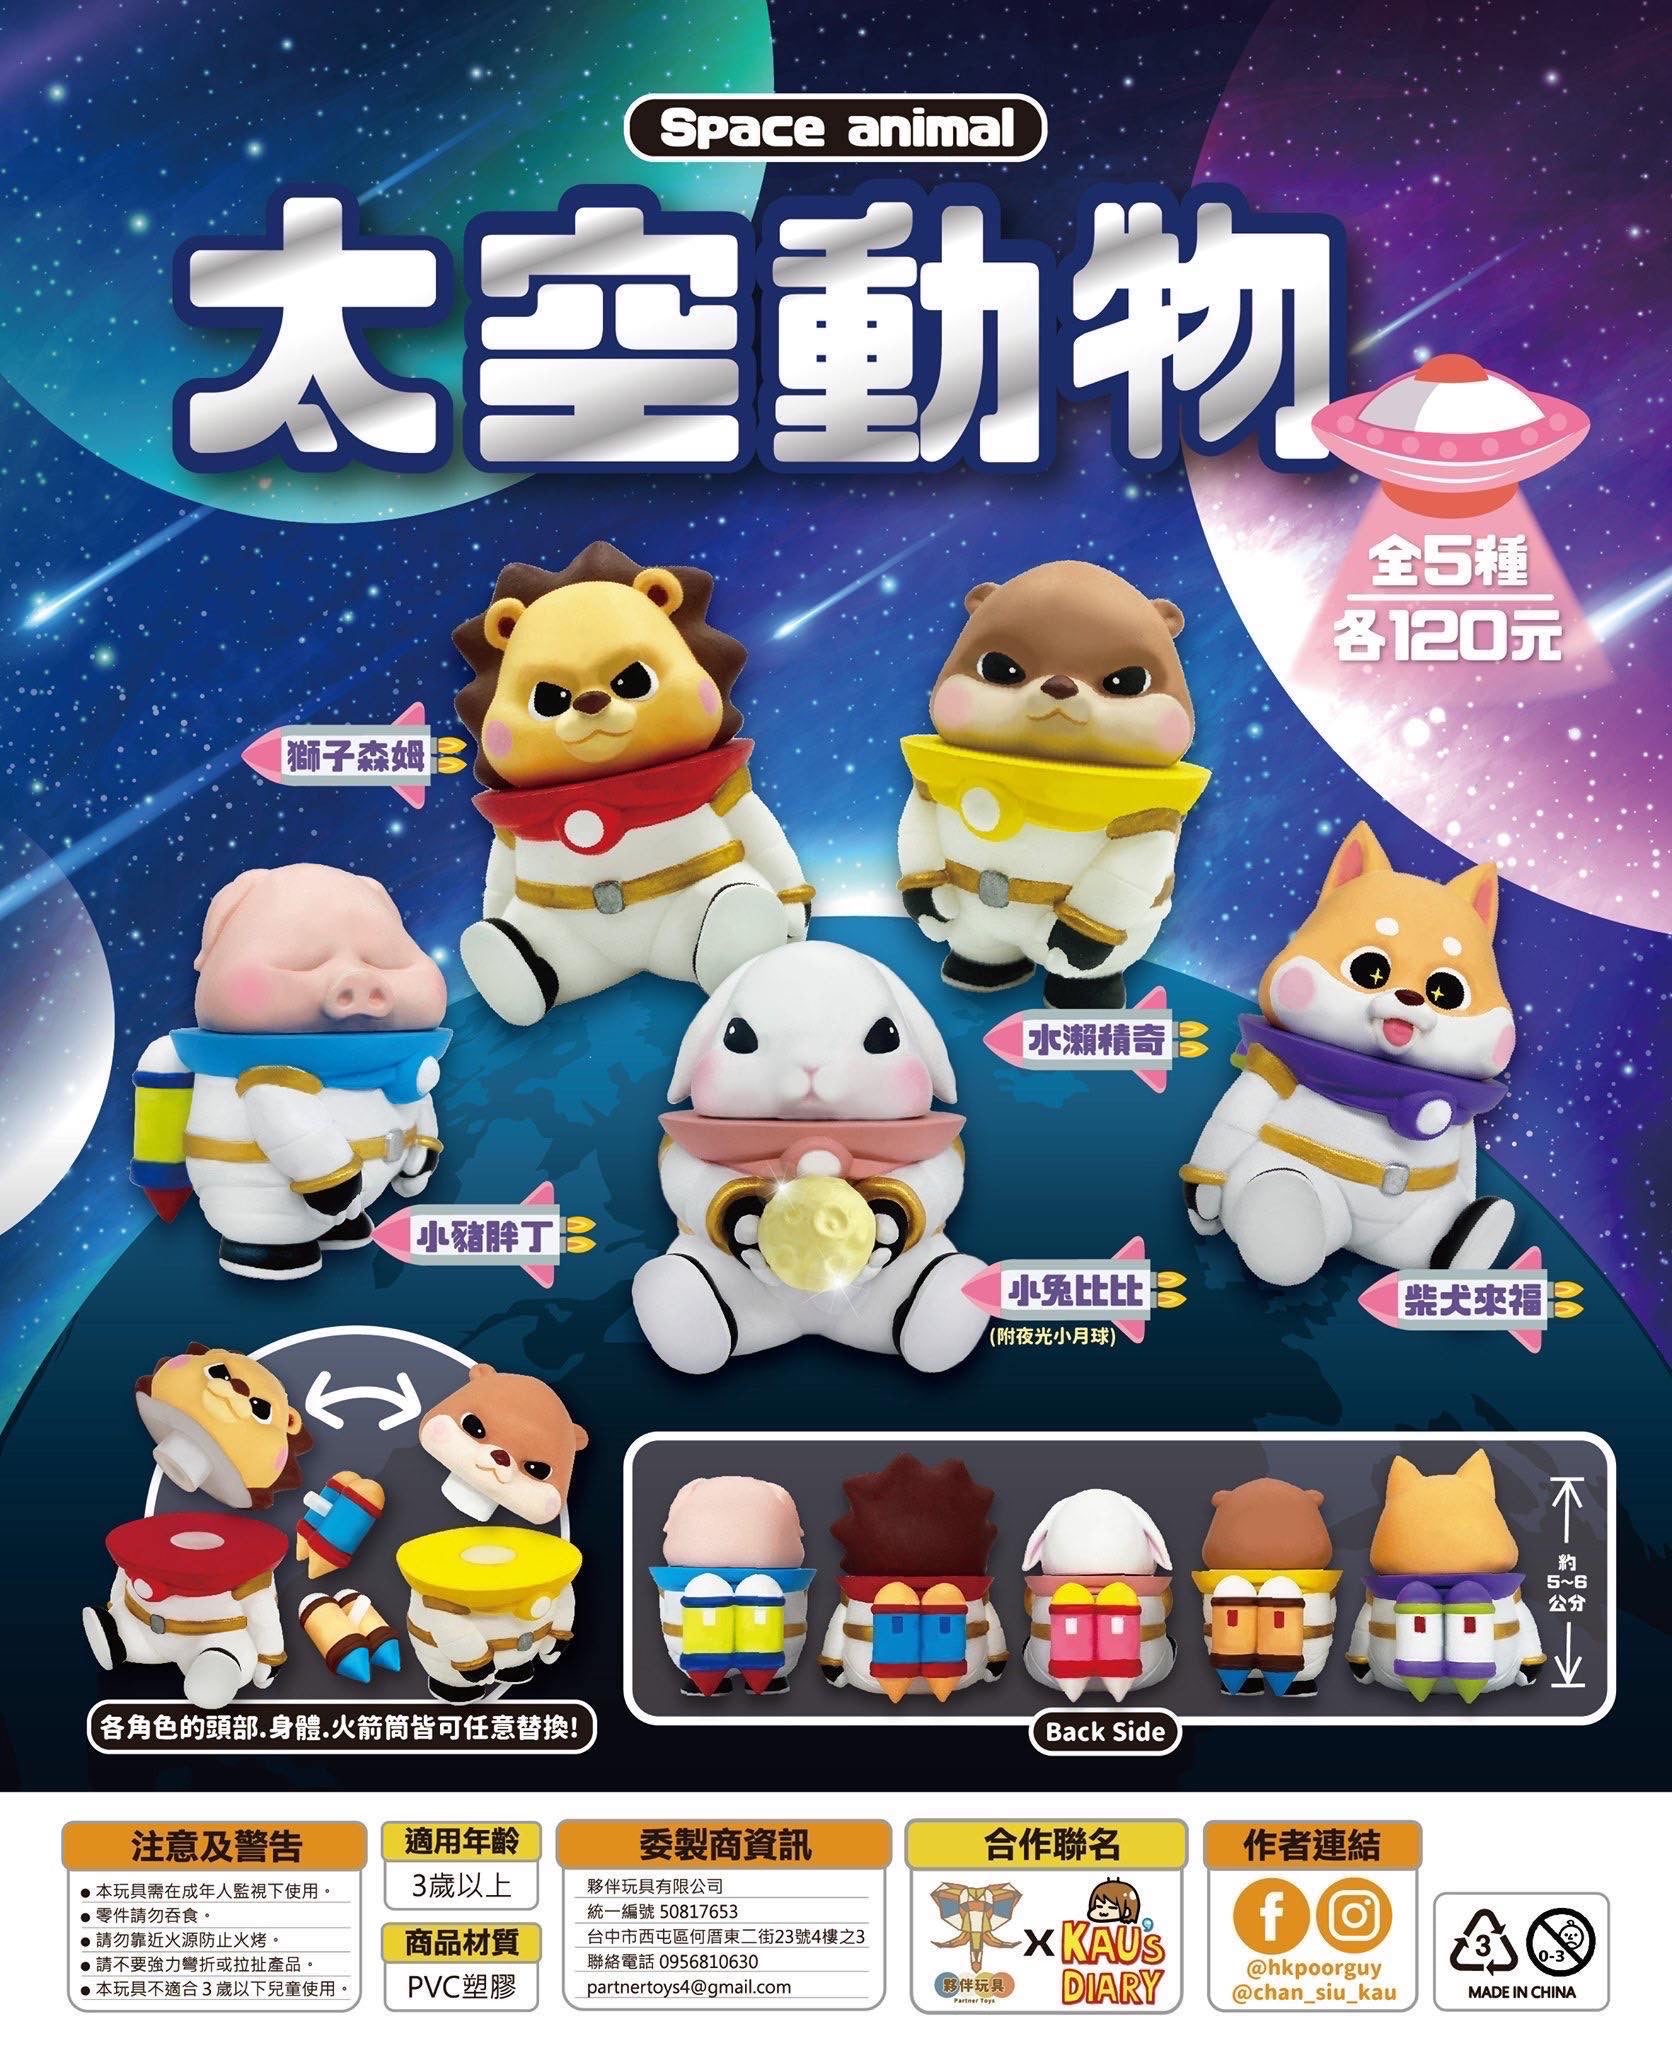 Space Animals Gacha Series: A poster featuring toy lion, rabbit, and space-suited animals.